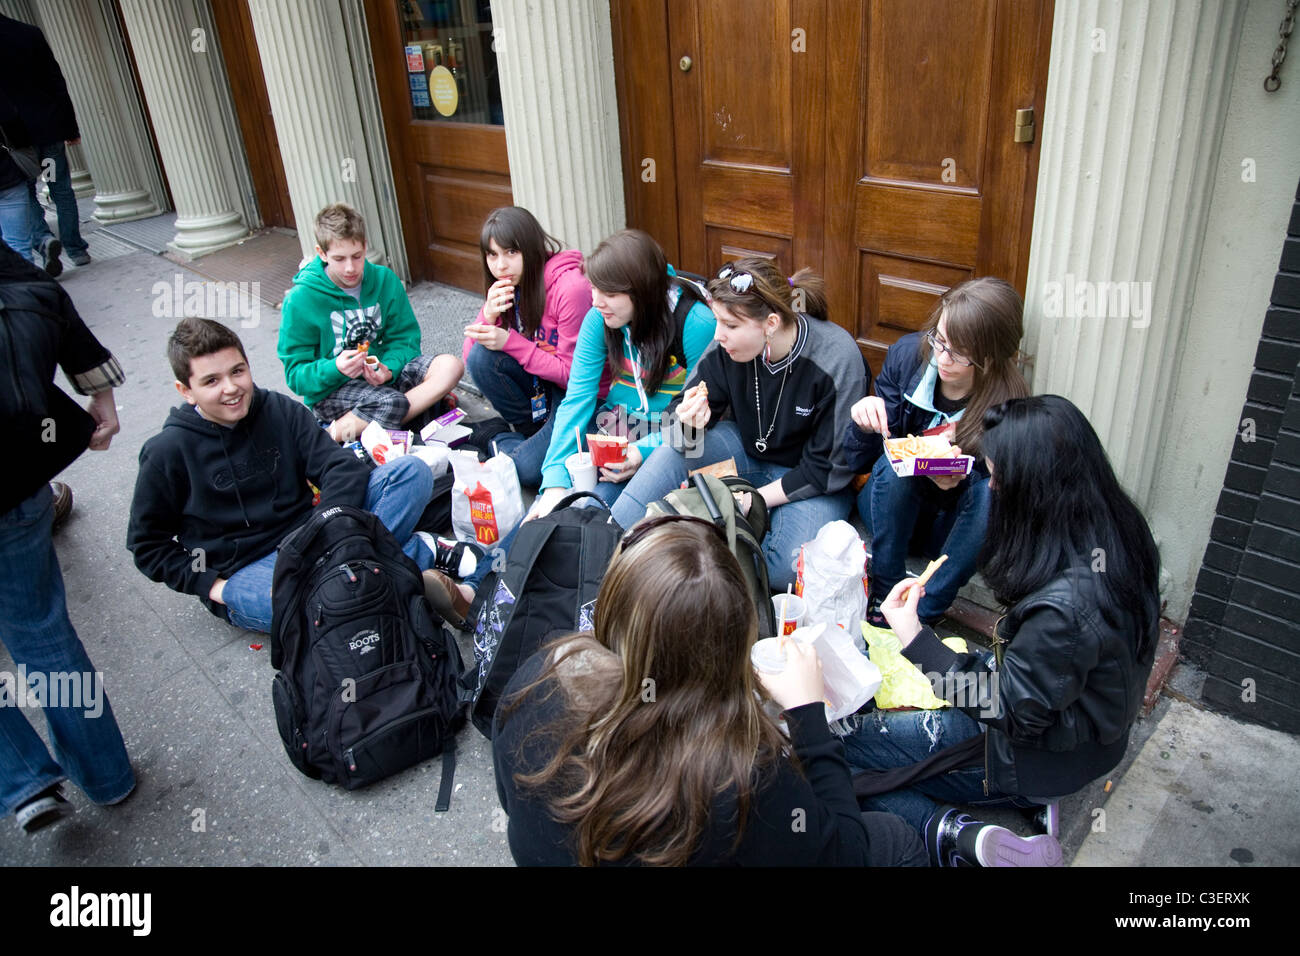 Teens from Quebec, Canada sit on the sidewalk on Canal St. in NYC, eat their McDonald's lunch during their spring vacation trip. Stock Photo